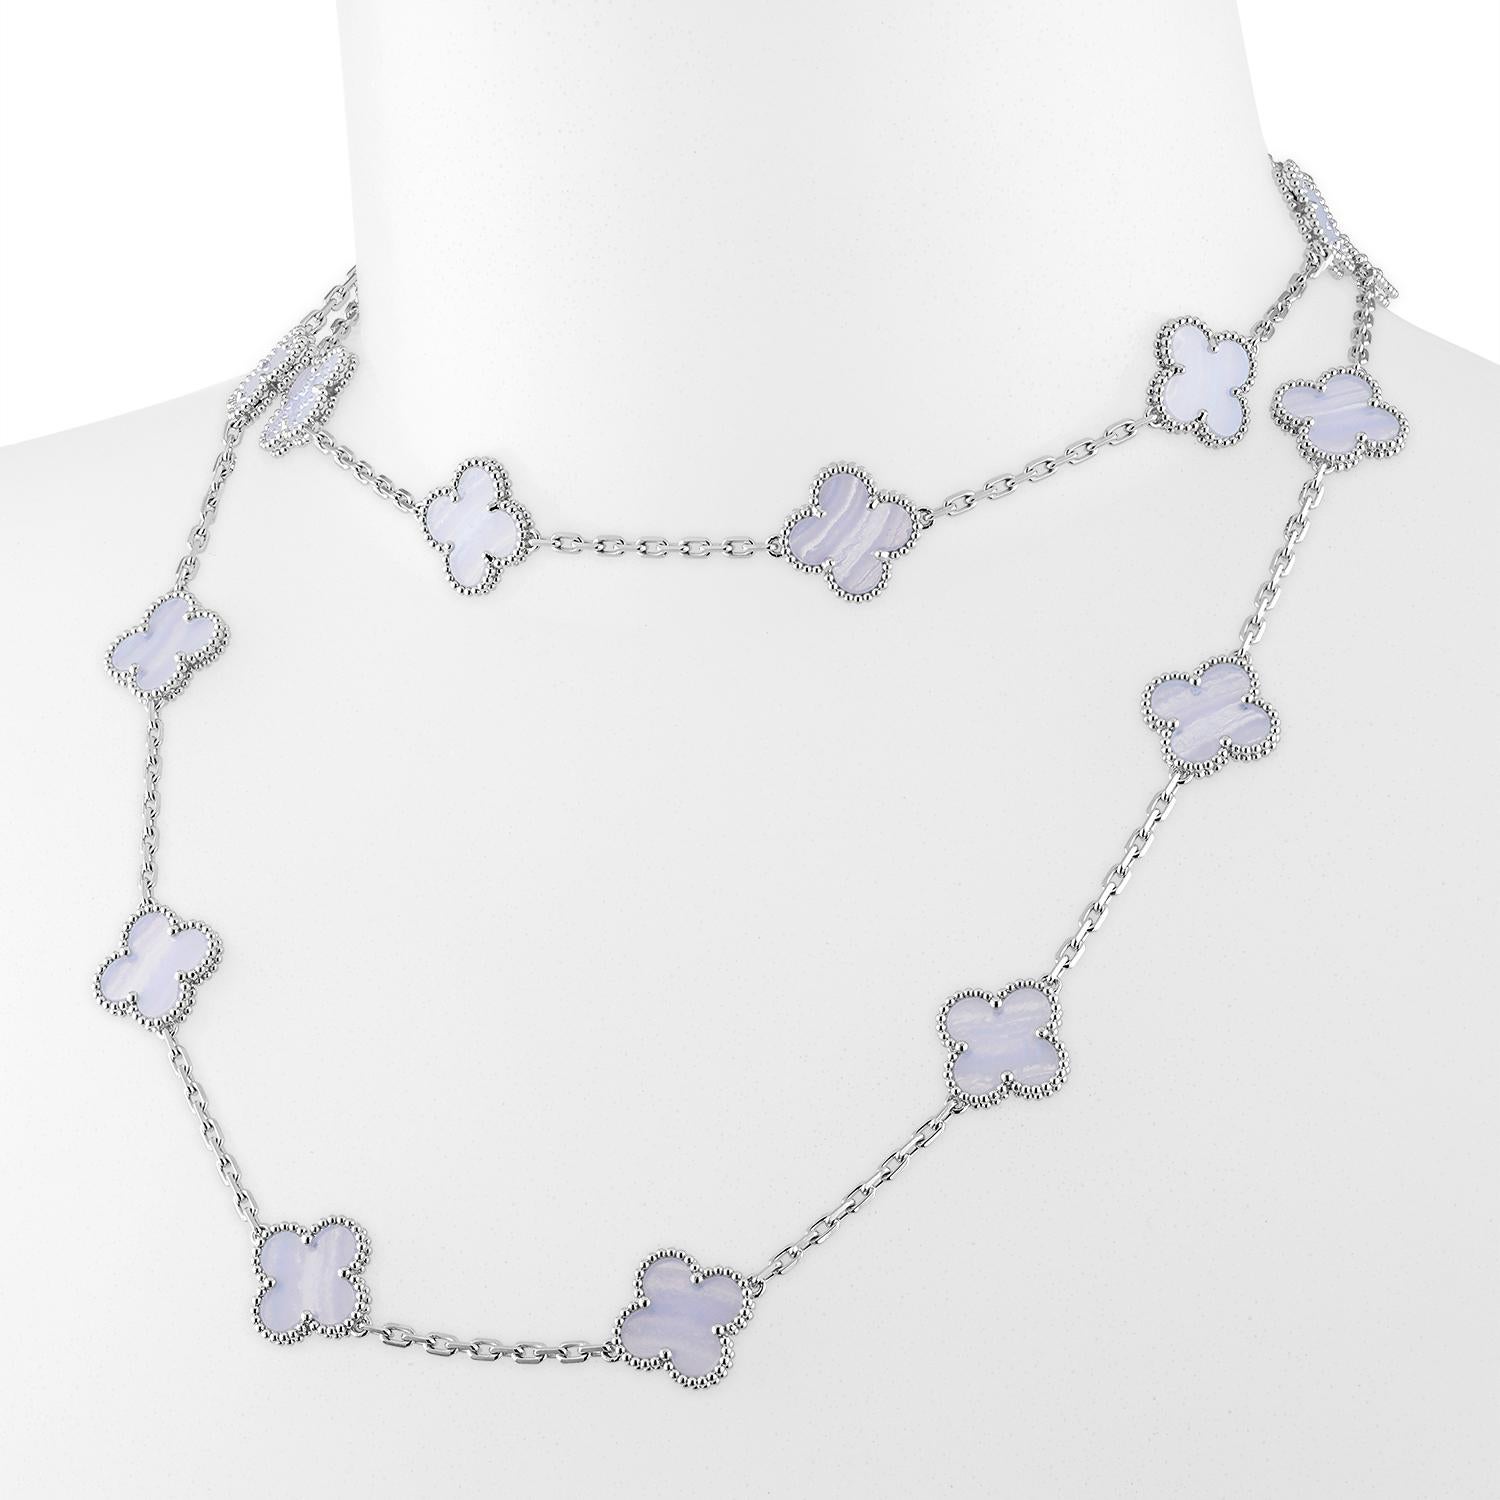 Van Cleef & Arpels long necklace of 20 motifs Chalcedony. Multiple ways of wearing as a necklace or a bracelet. The beautiful natural pattern of quartz.

Maker: Van Cleef & Arpels

Accessories: Boxes, the original certificate dated 2021, and a Real